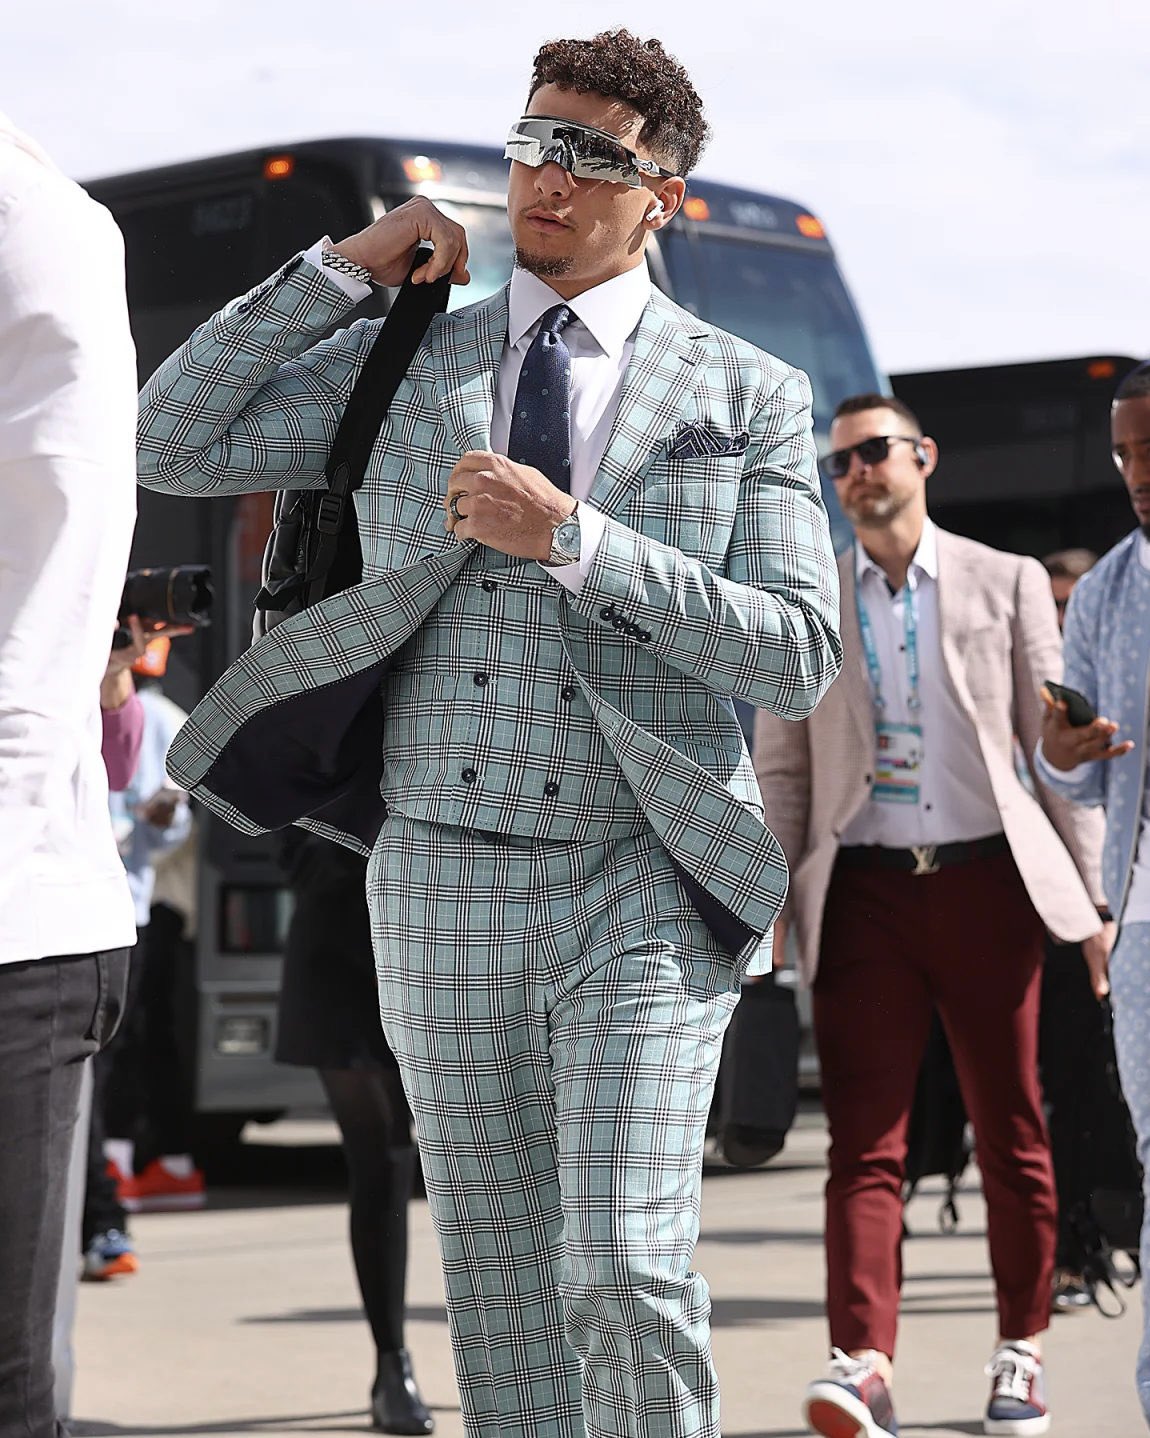 GQ Sports on X: Patrick Mahomes has arrived #chiefs #SuperBowl